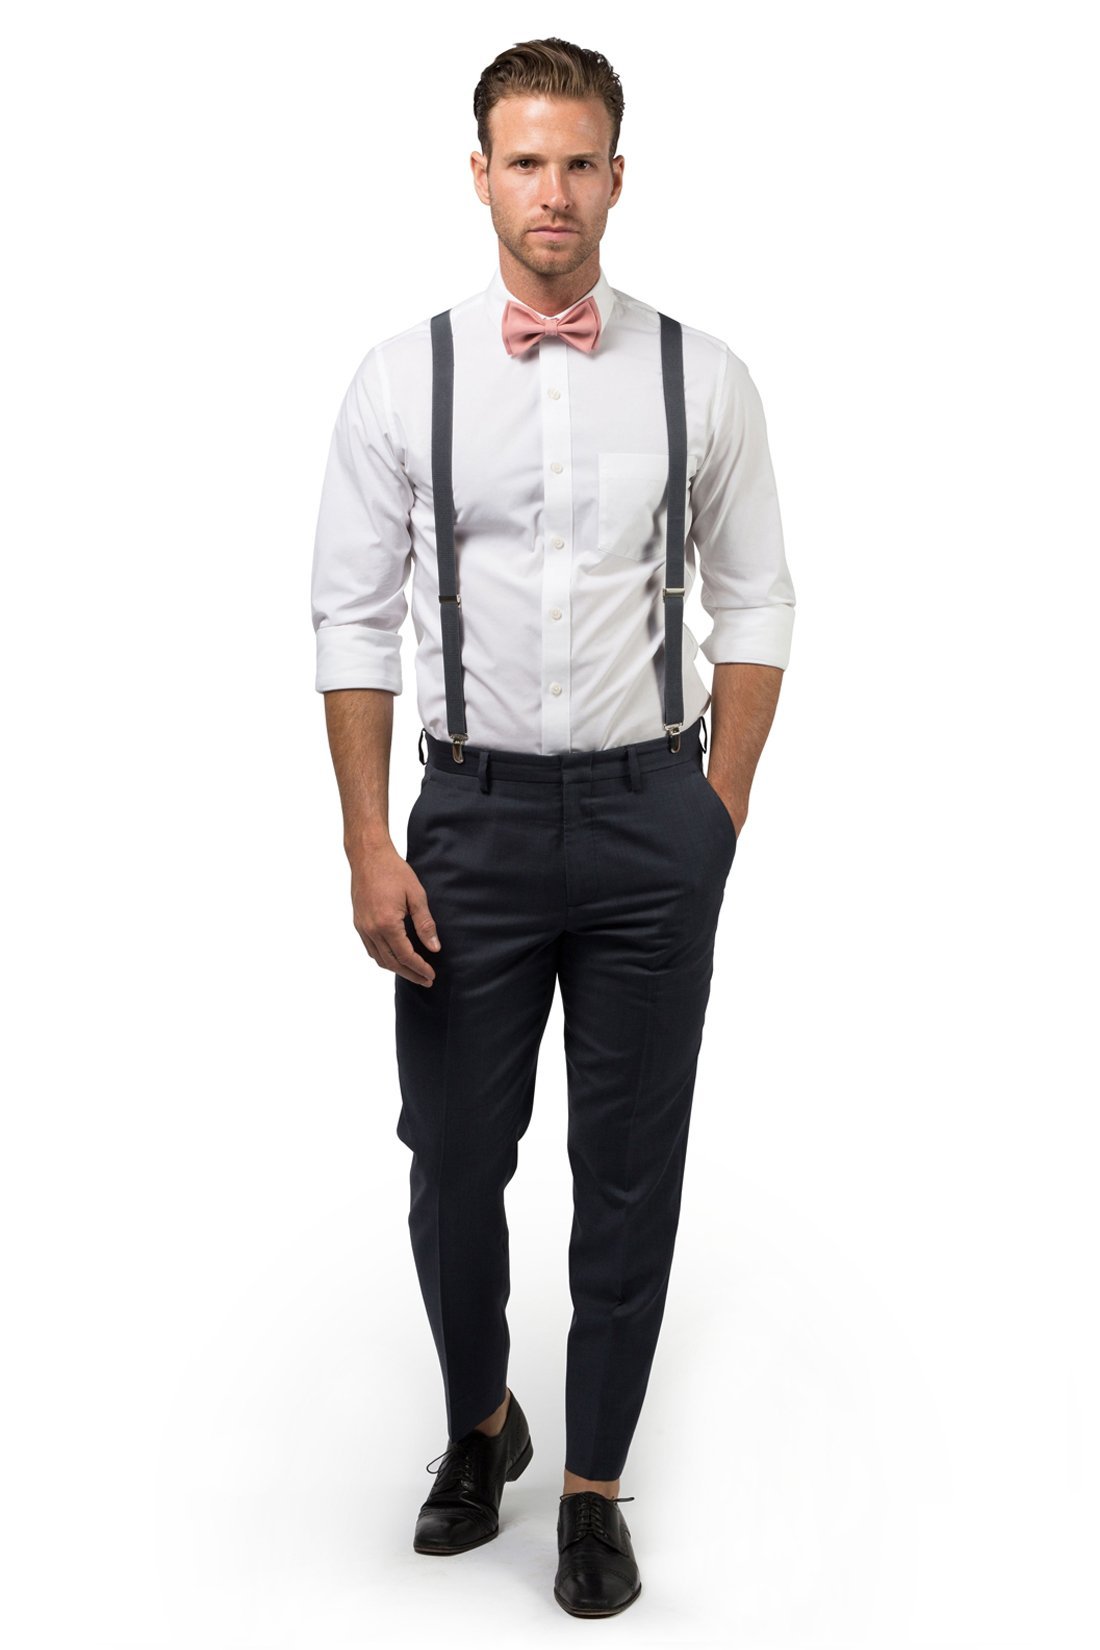 Charcoal Suspenders & Dusty Rose Bow Tie